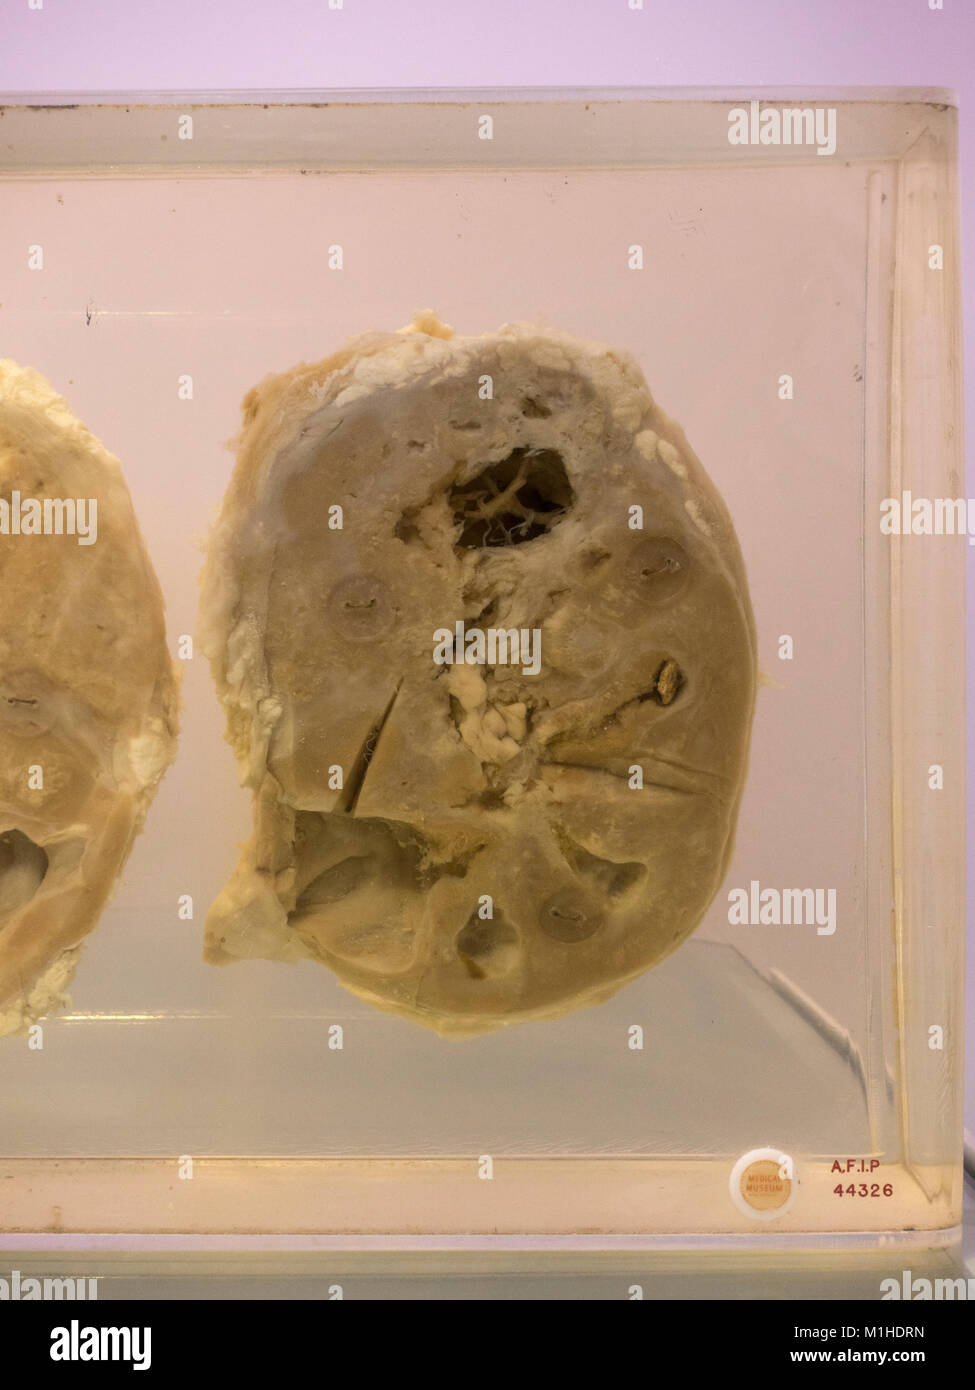 A human kidney suffering from squamous cell carcinoma on display in the National Museum of Health and Medicine, Silver Spring, MD, USA. Stock Photo